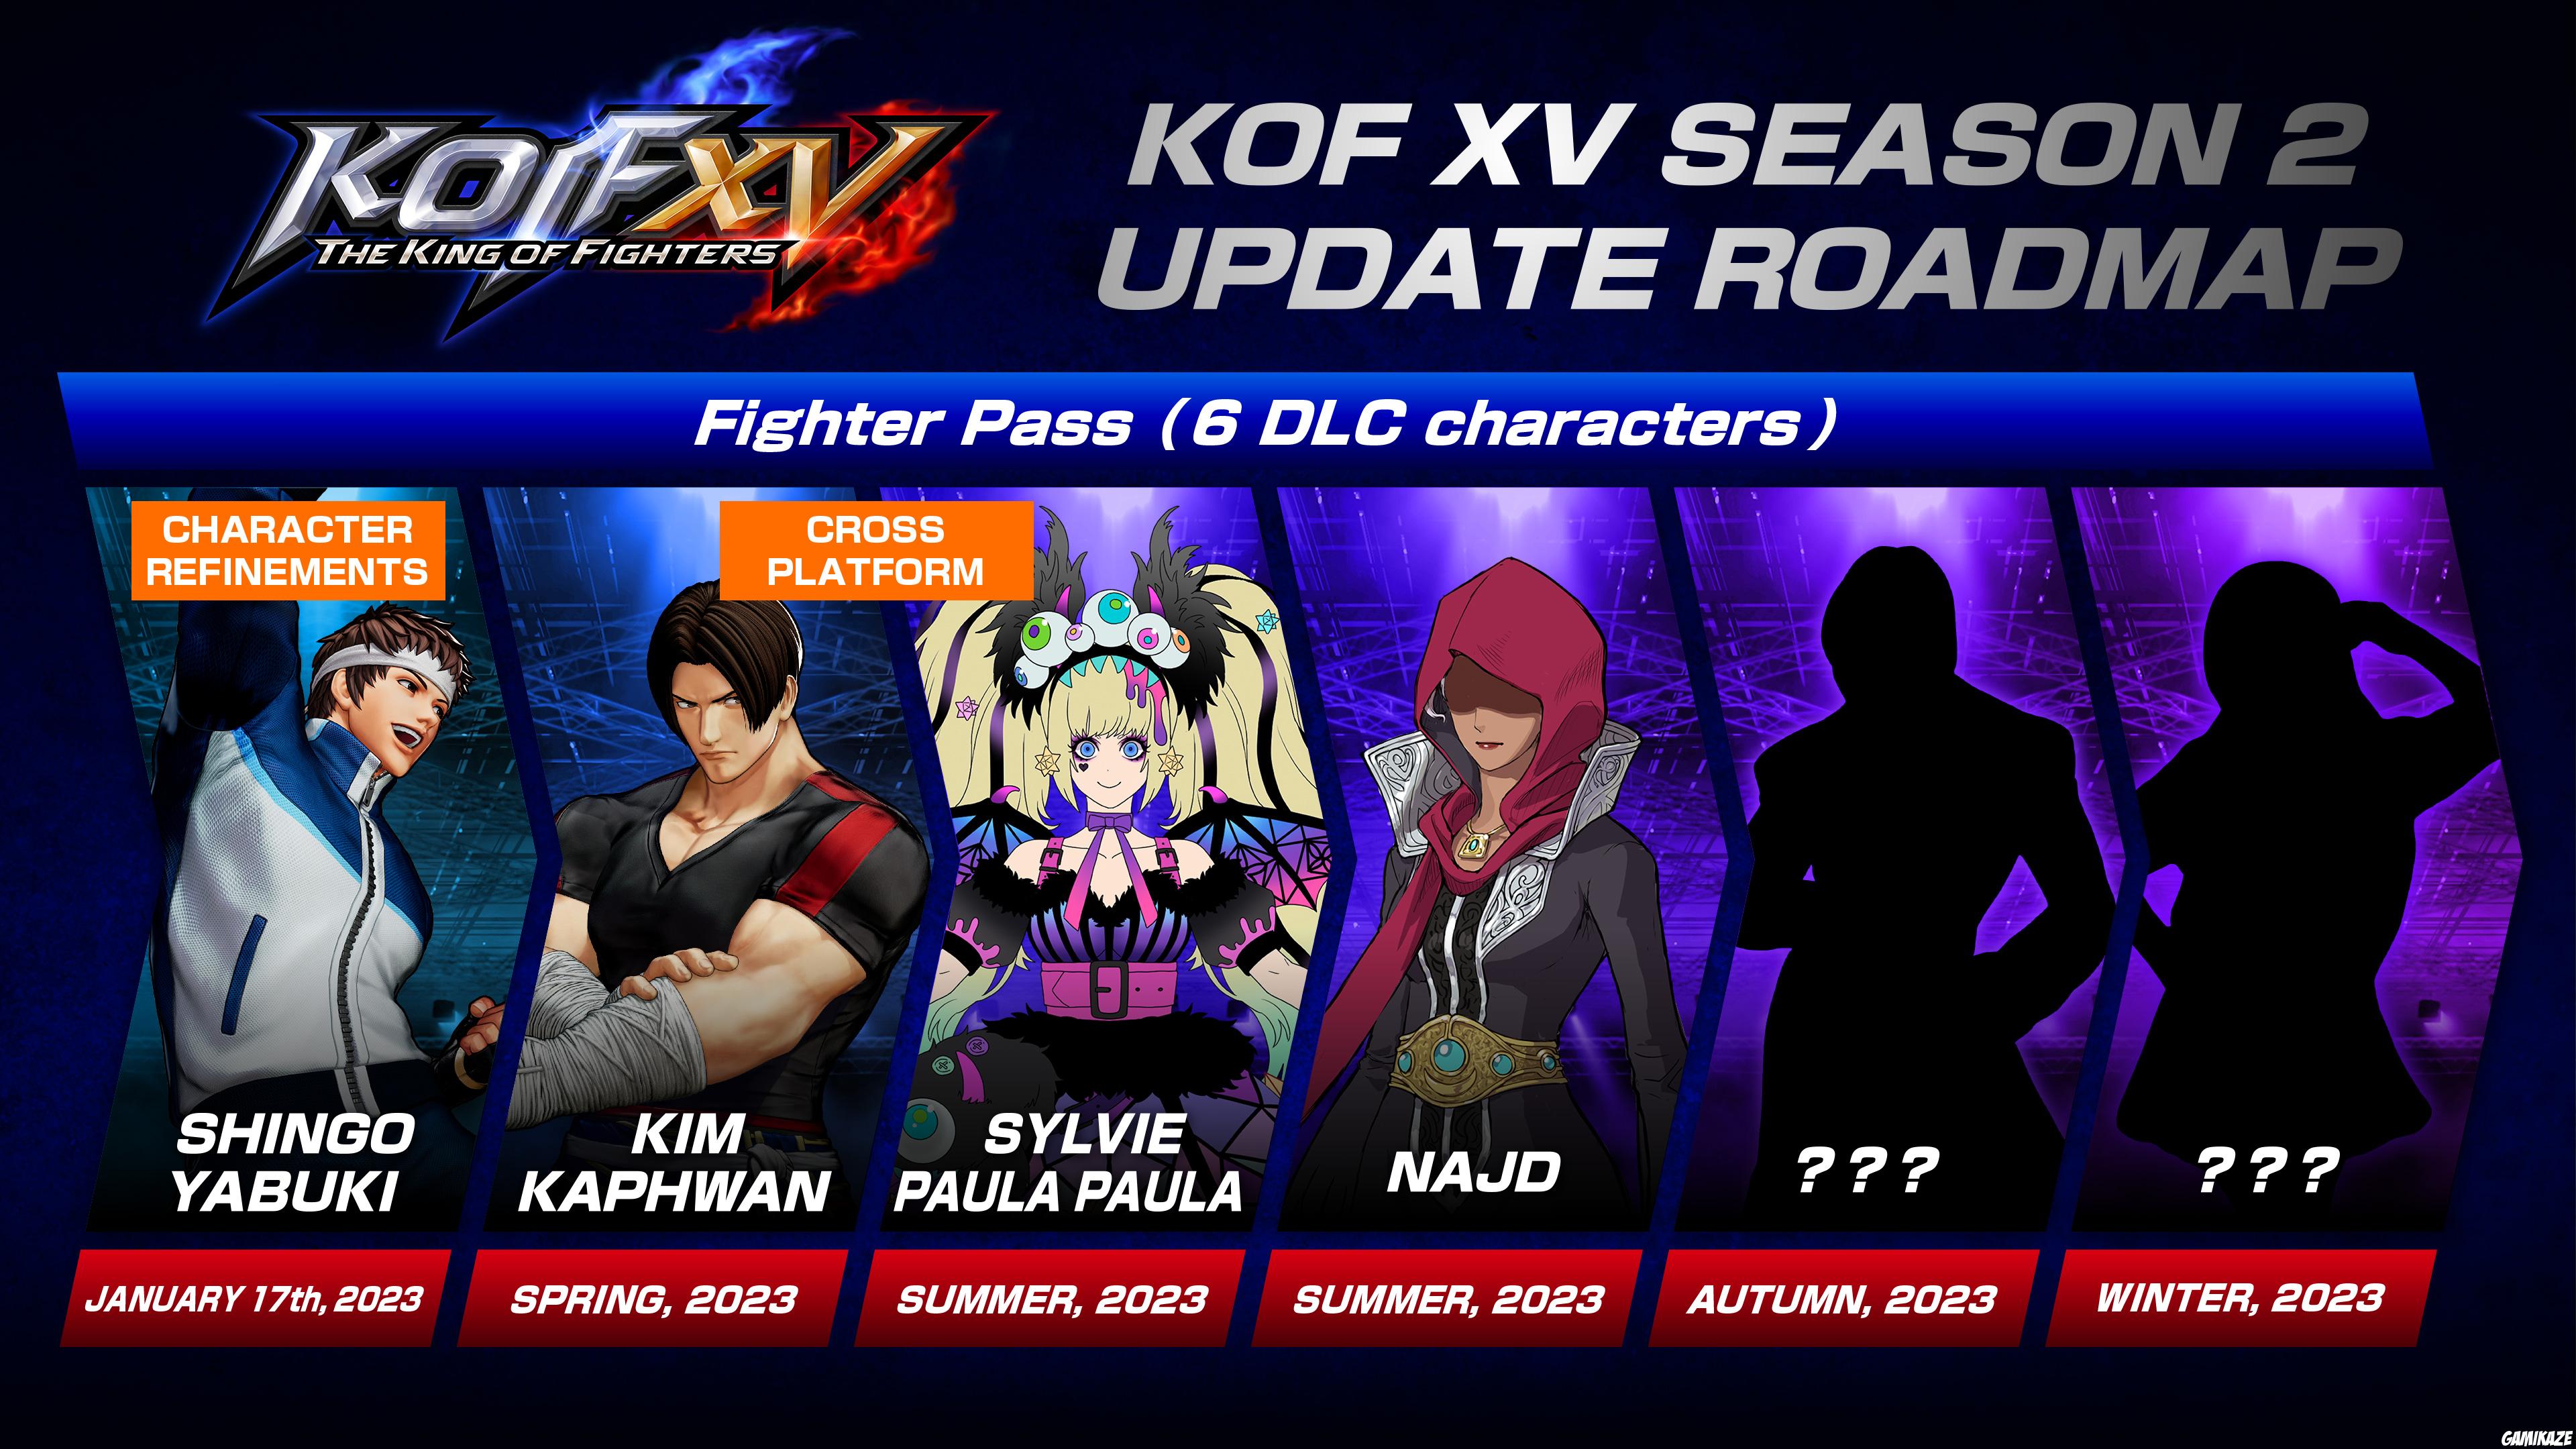 ps5 - The King of Fighters XV 